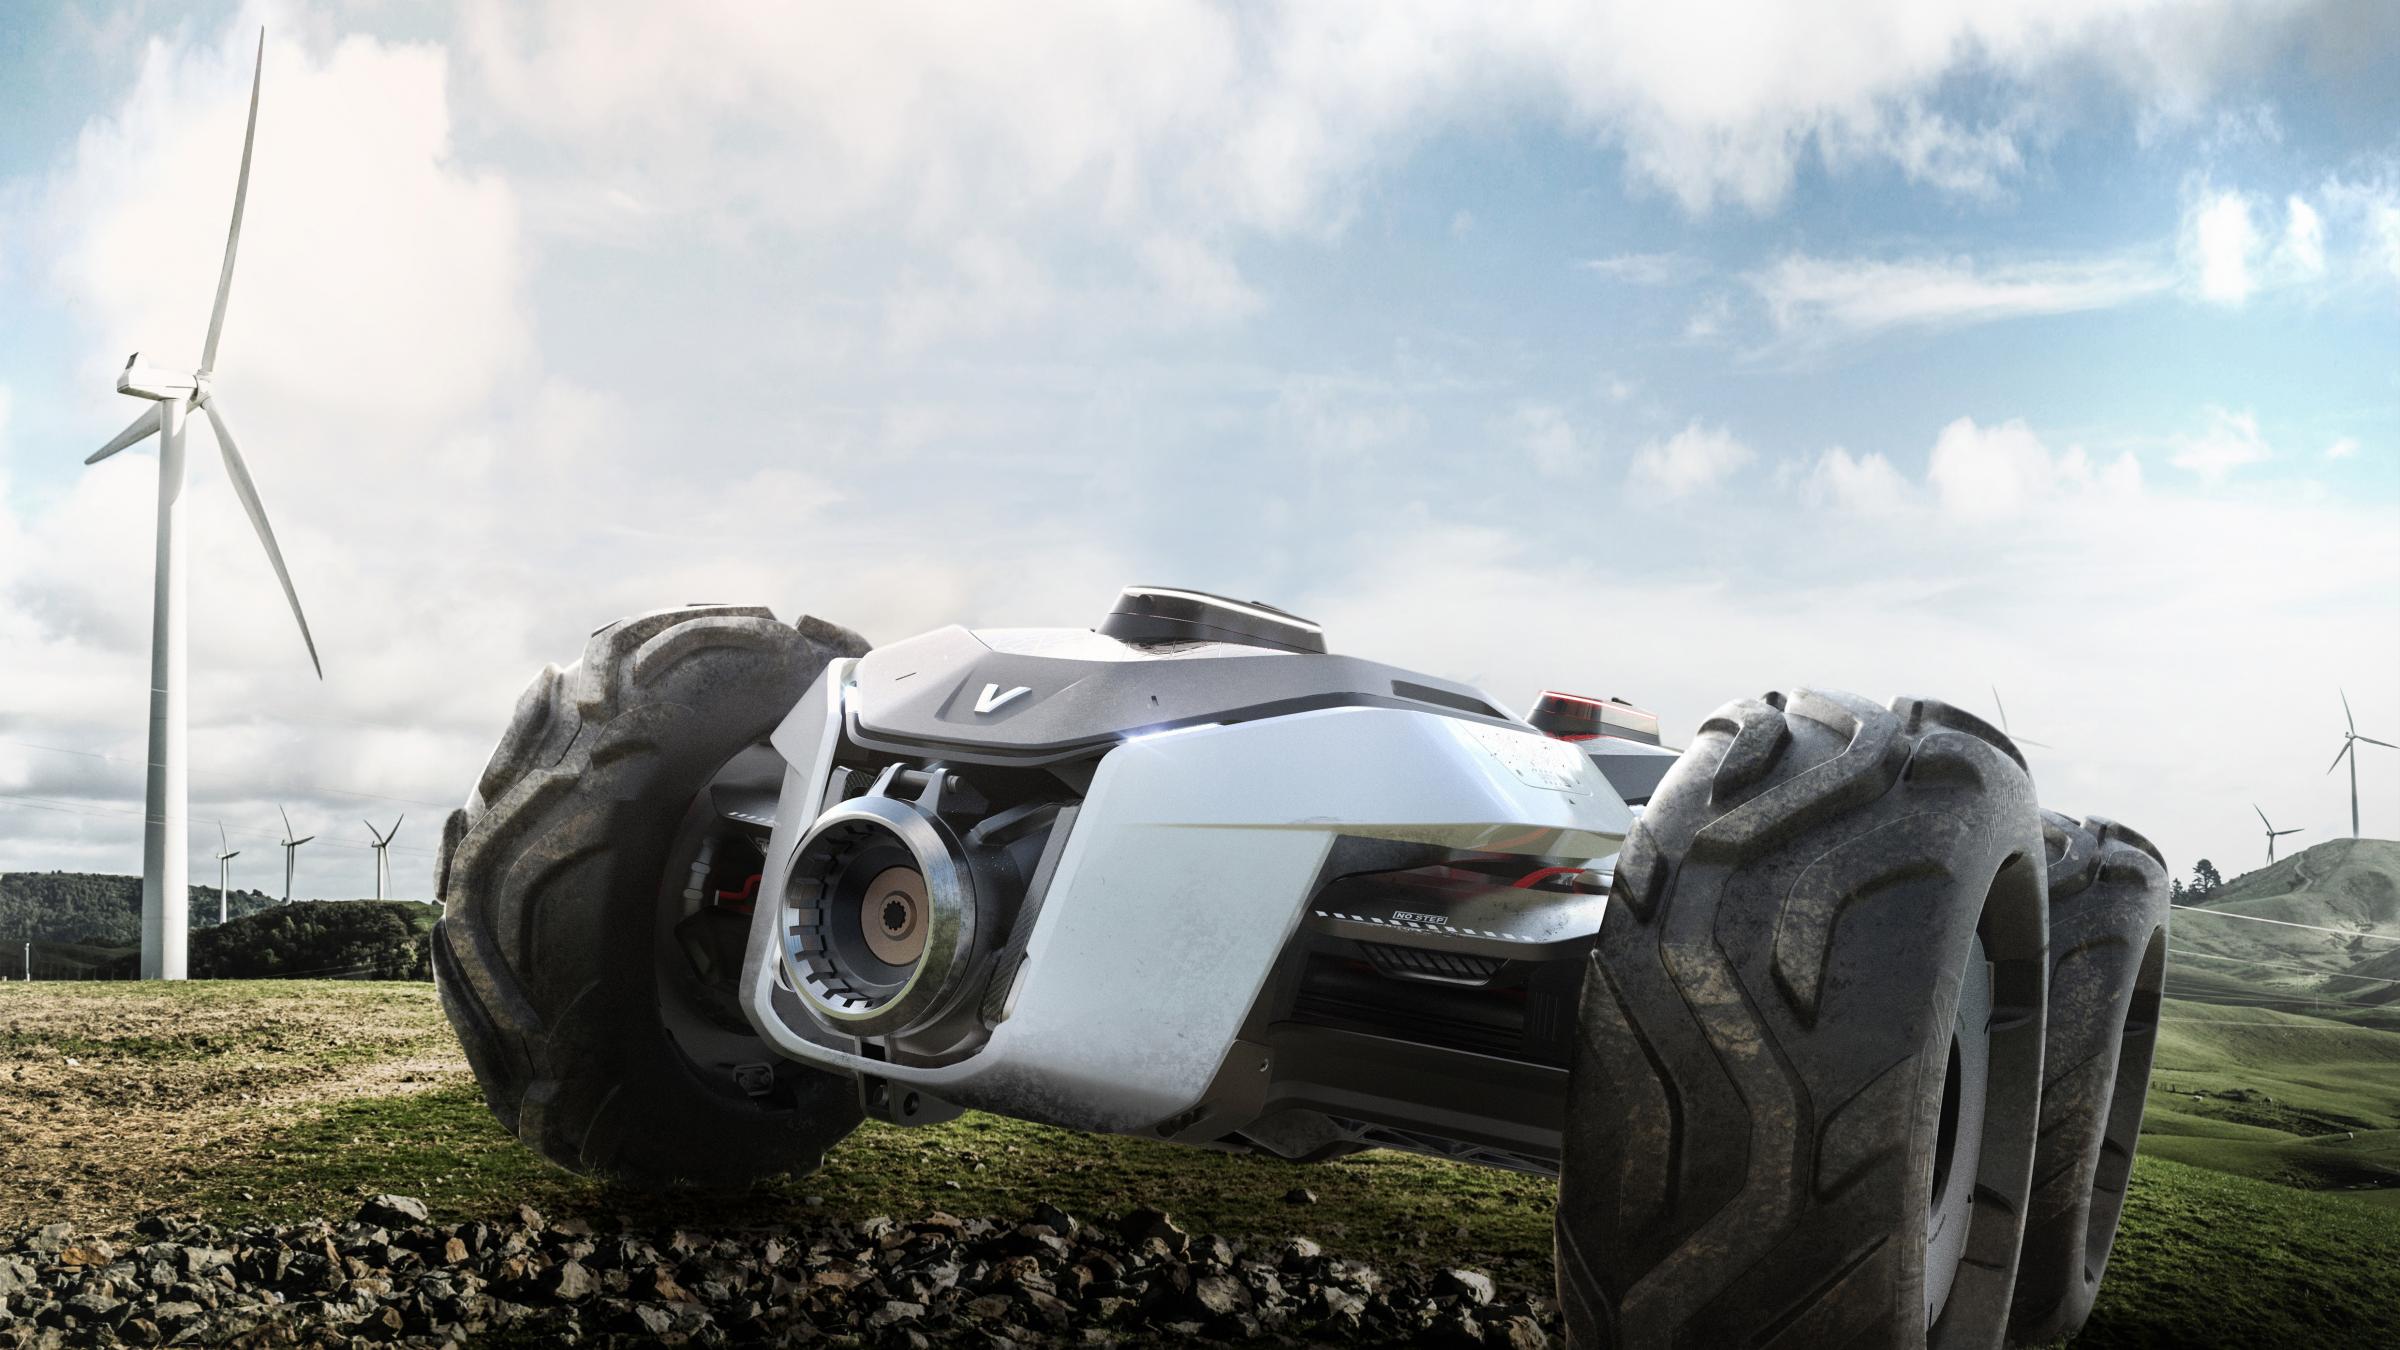 Is this the future? Valtras take on tractor design in the coming years